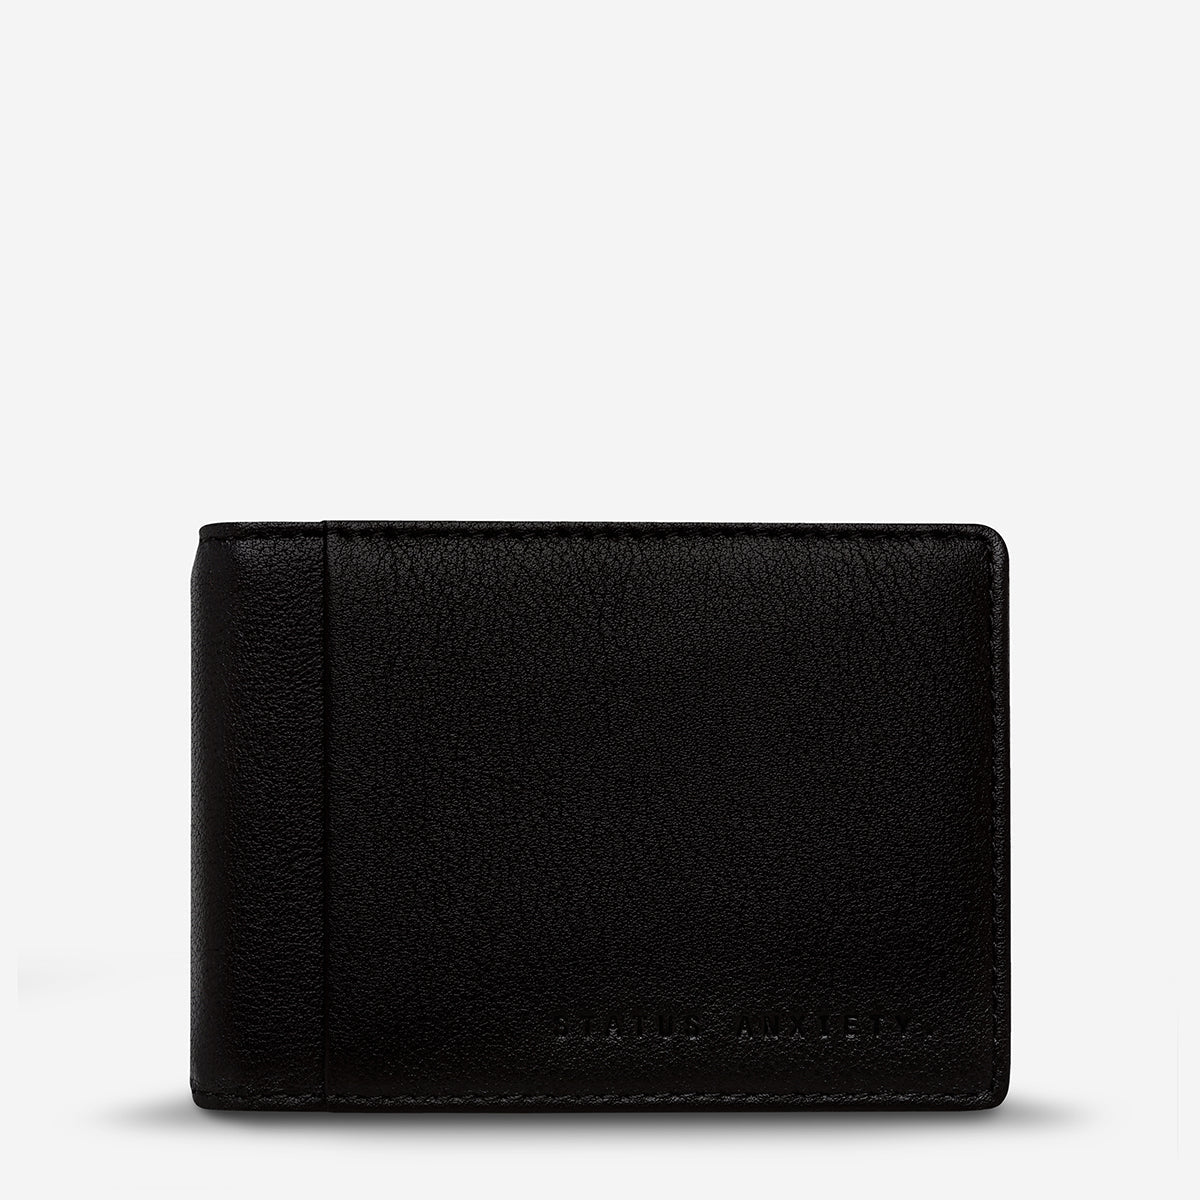 Status Anxiety Melvin Men's Leather Wallet Black